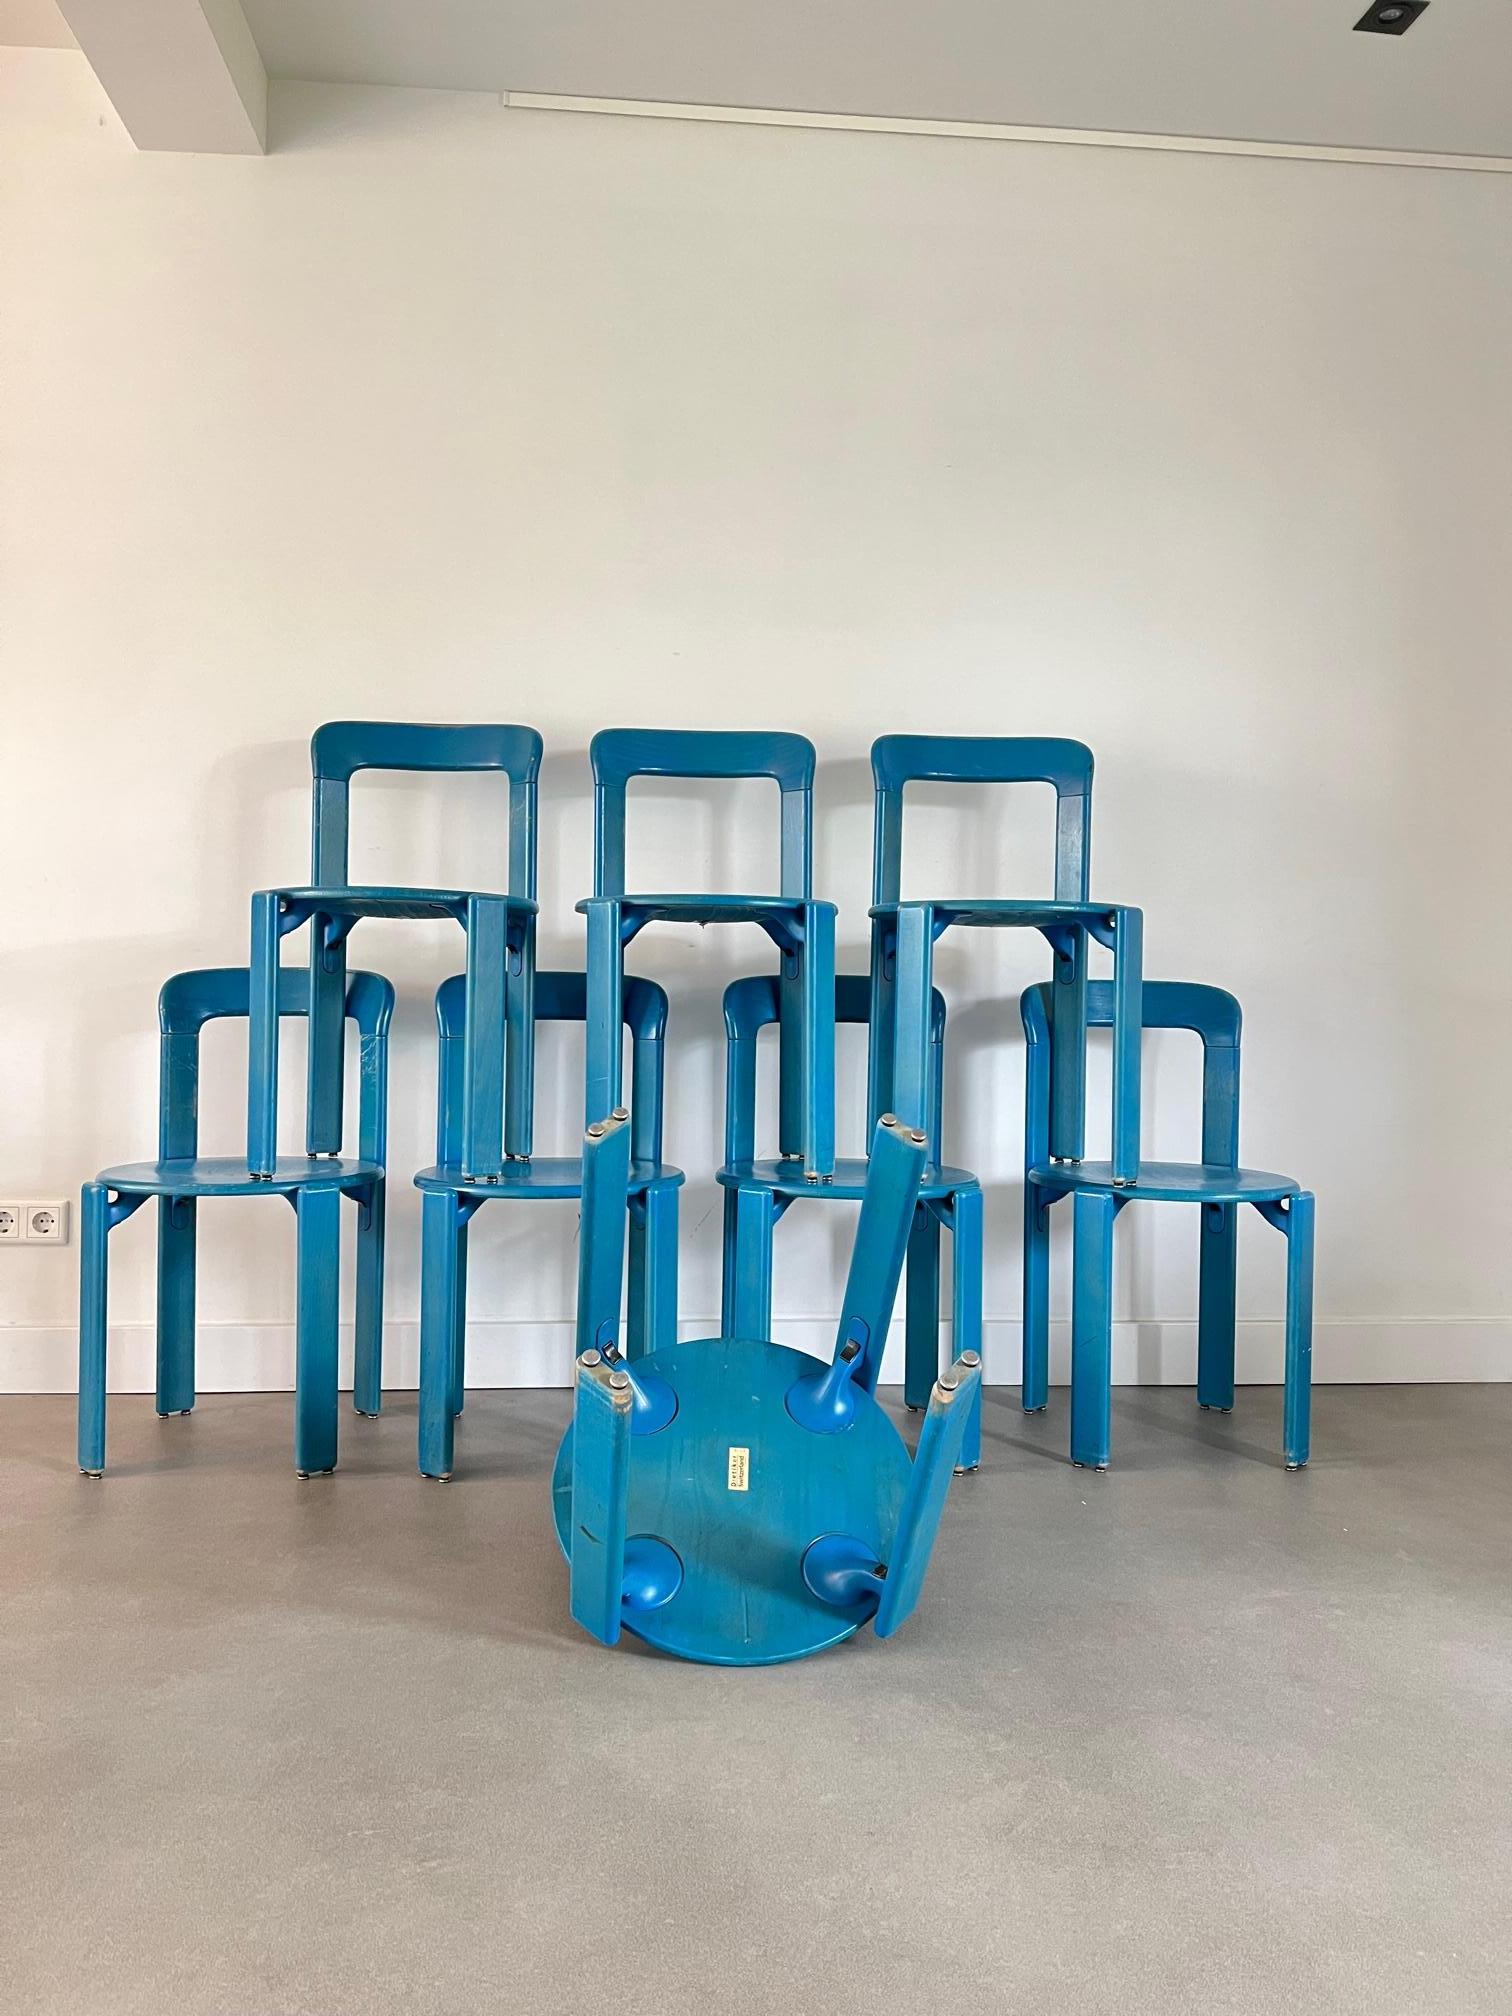 For the love of blue. These sturdy chairs by Bruno Rey for Dietiker Switzerland in their orginal blue color are up for sale. These chair show some scratching but given their age is consisted with their age. 

Bruno Rey is a Swiss furniture